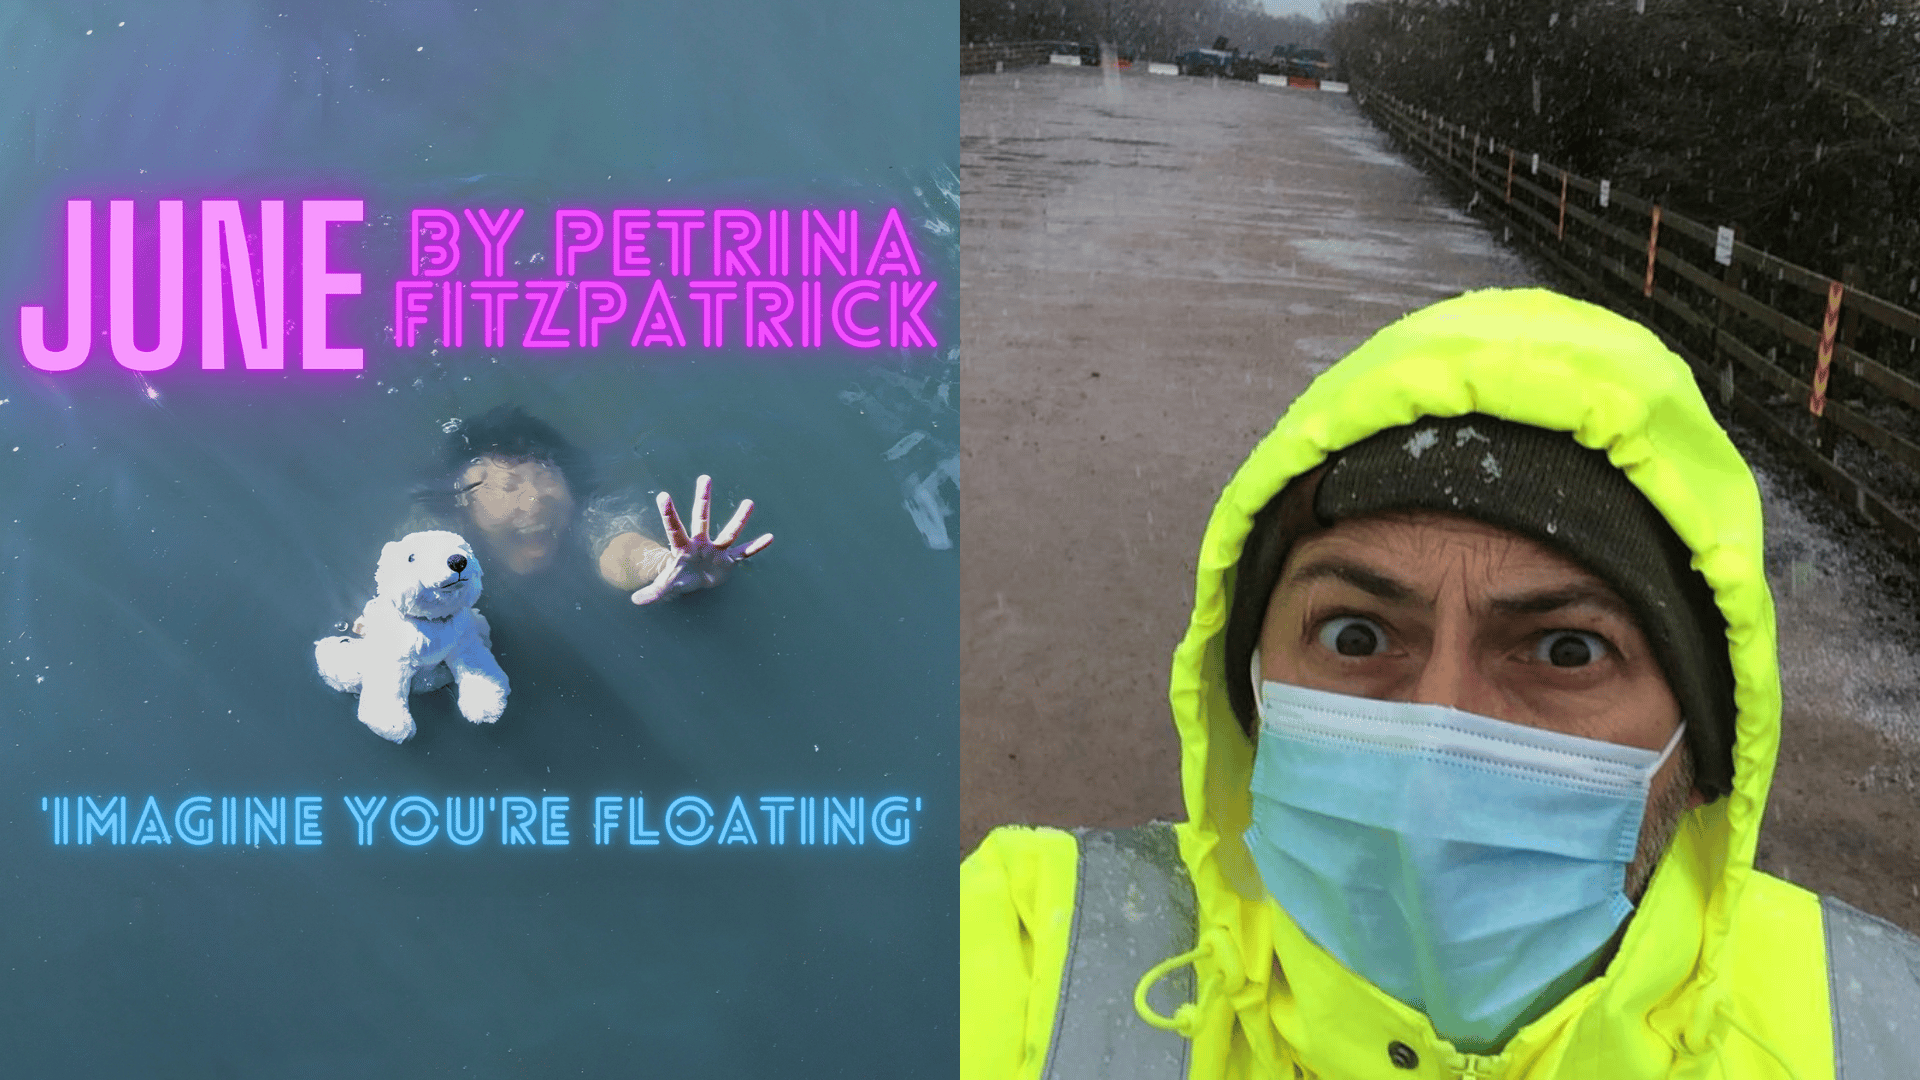 An image split in half: one hald shows a woman drowning while holding a cuddly toy, the other half shows a man in high-vis jacket and wearing a face mask